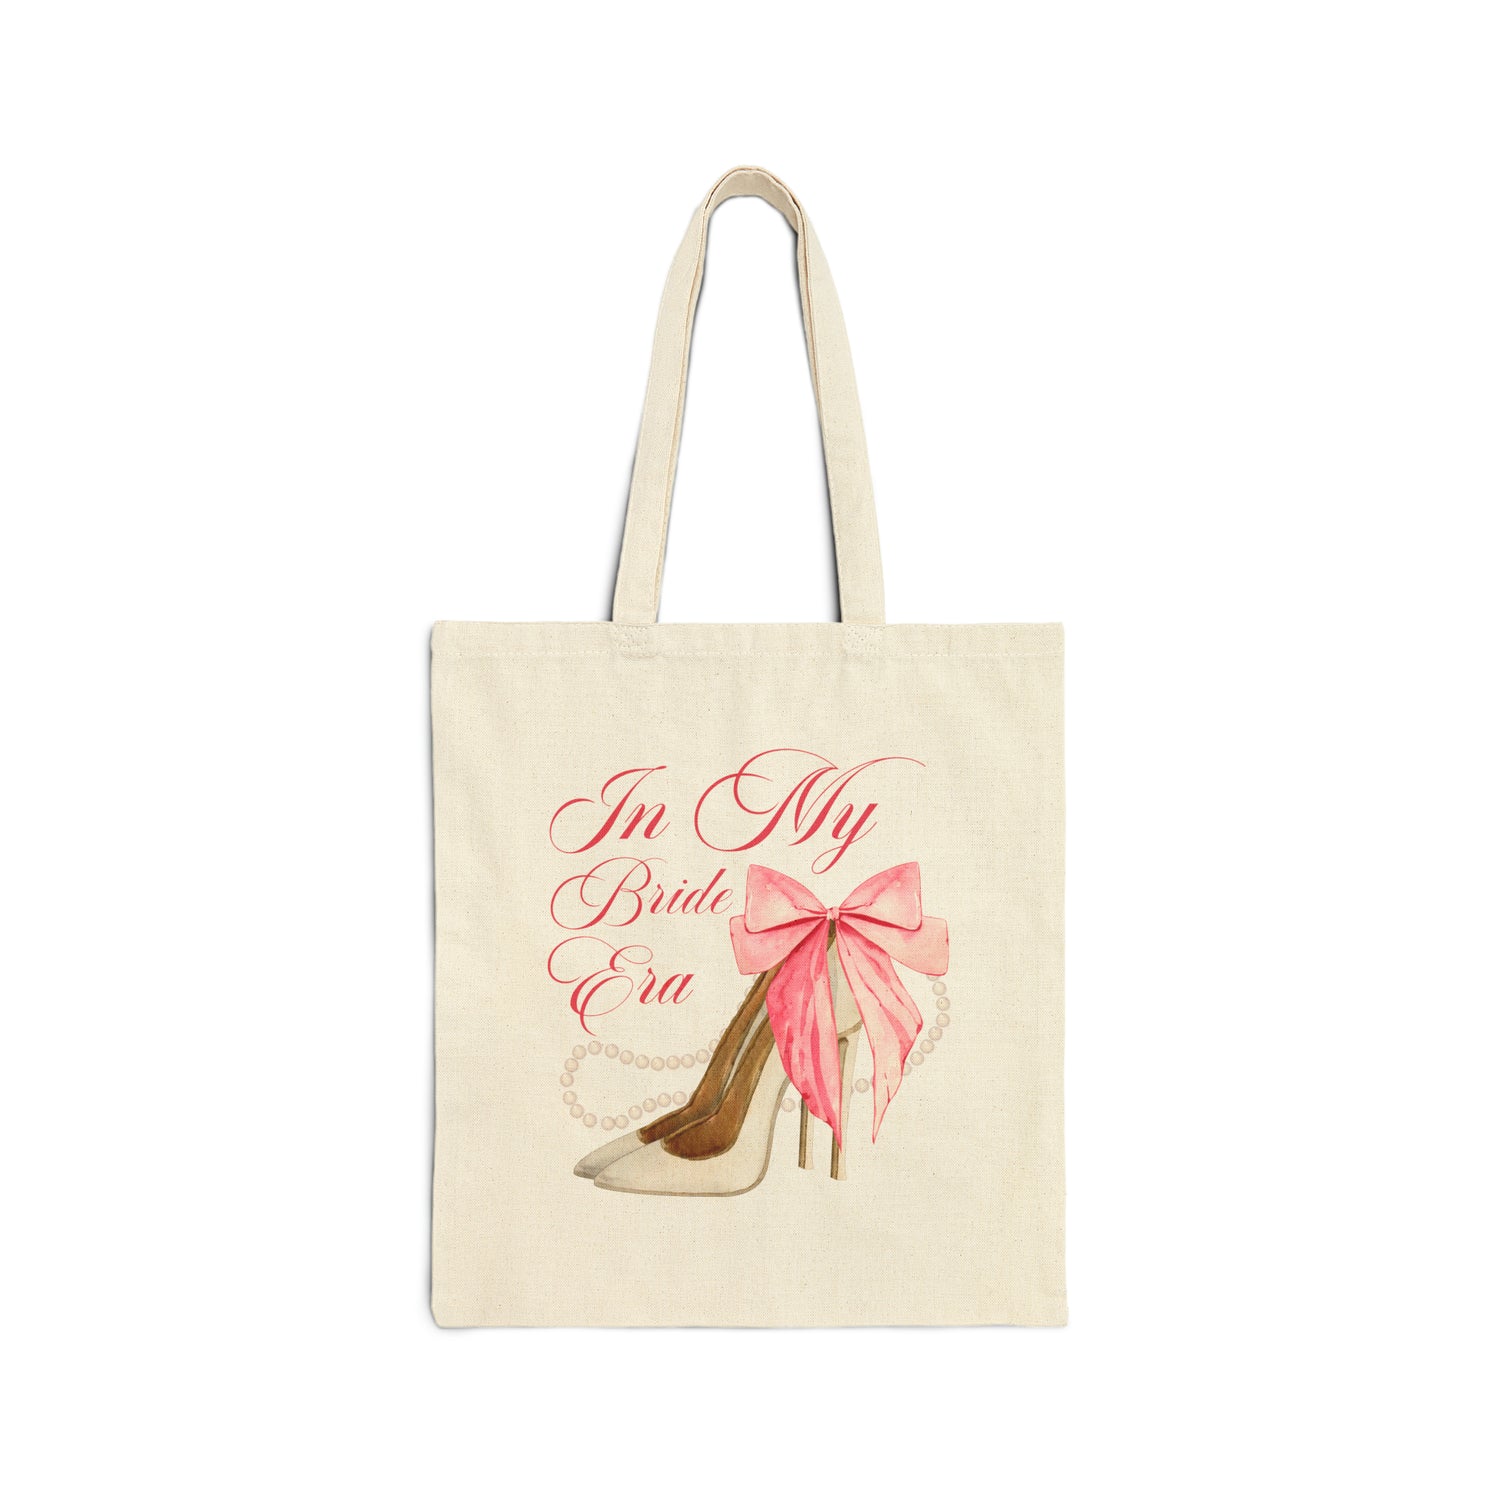 Bags + Totes